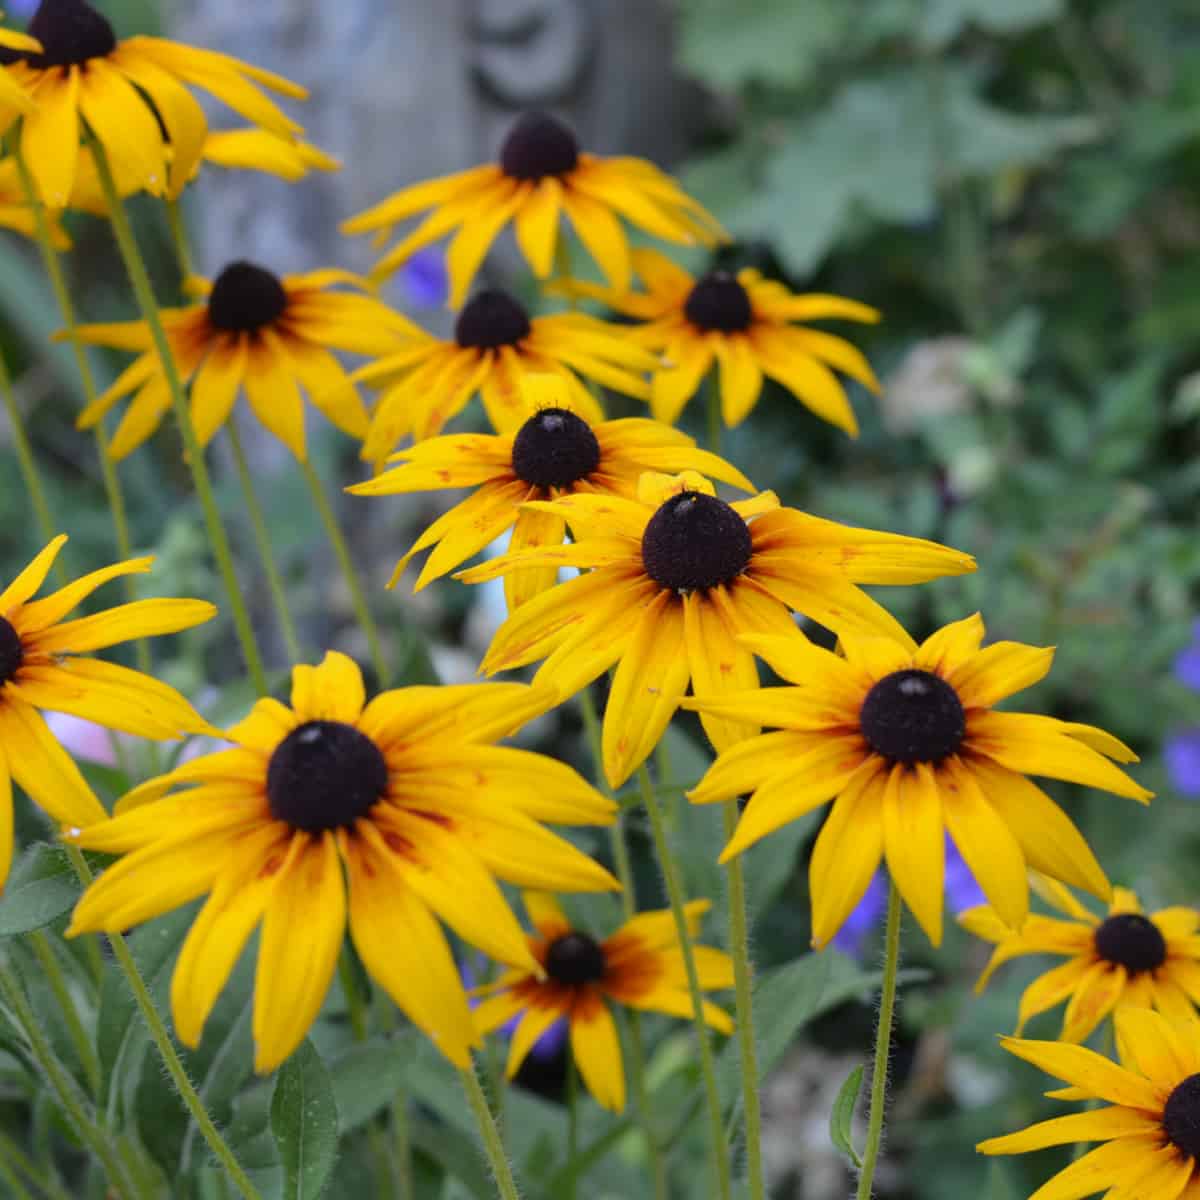 How to Grow Black Eyed Susans easily